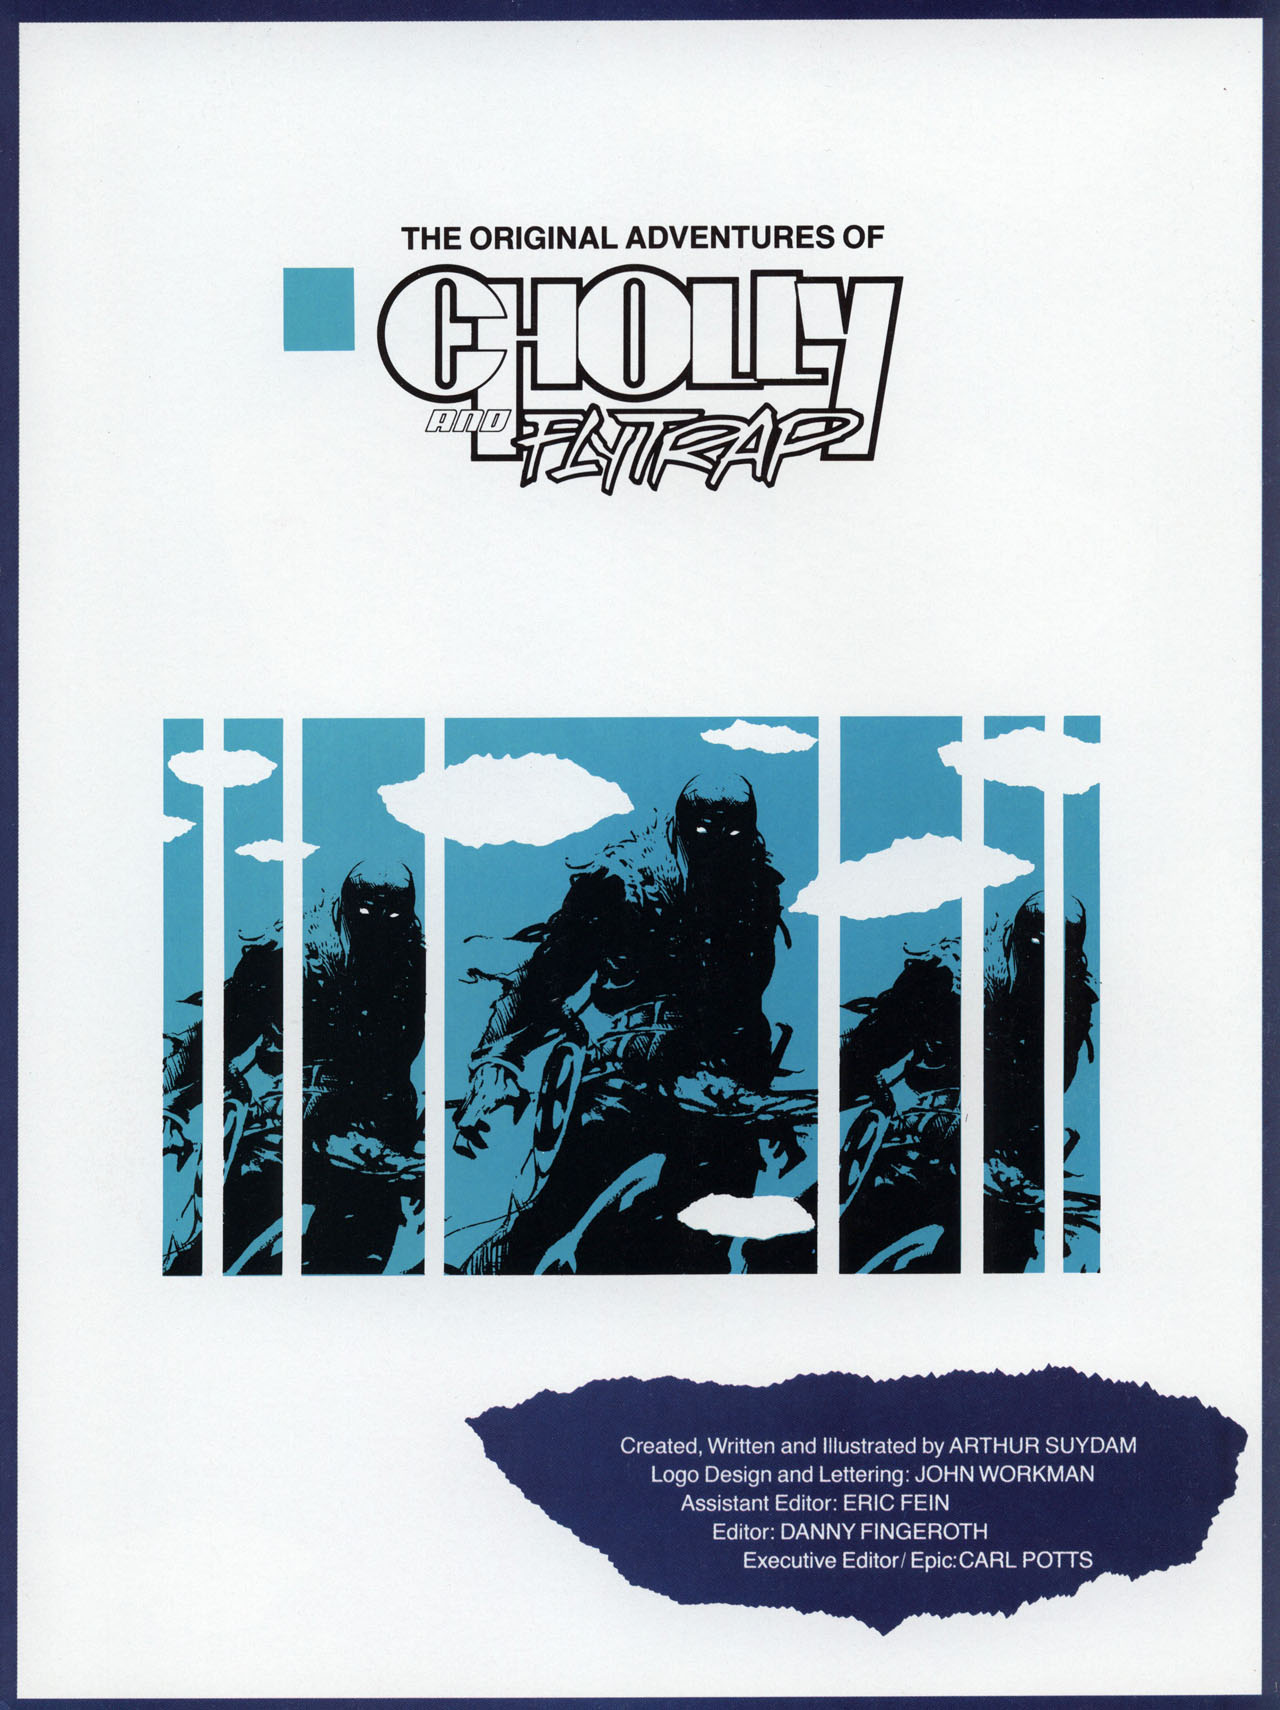 Read online The Original Adventures of Cholly and Flytrap comic -  Issue # Full - 3